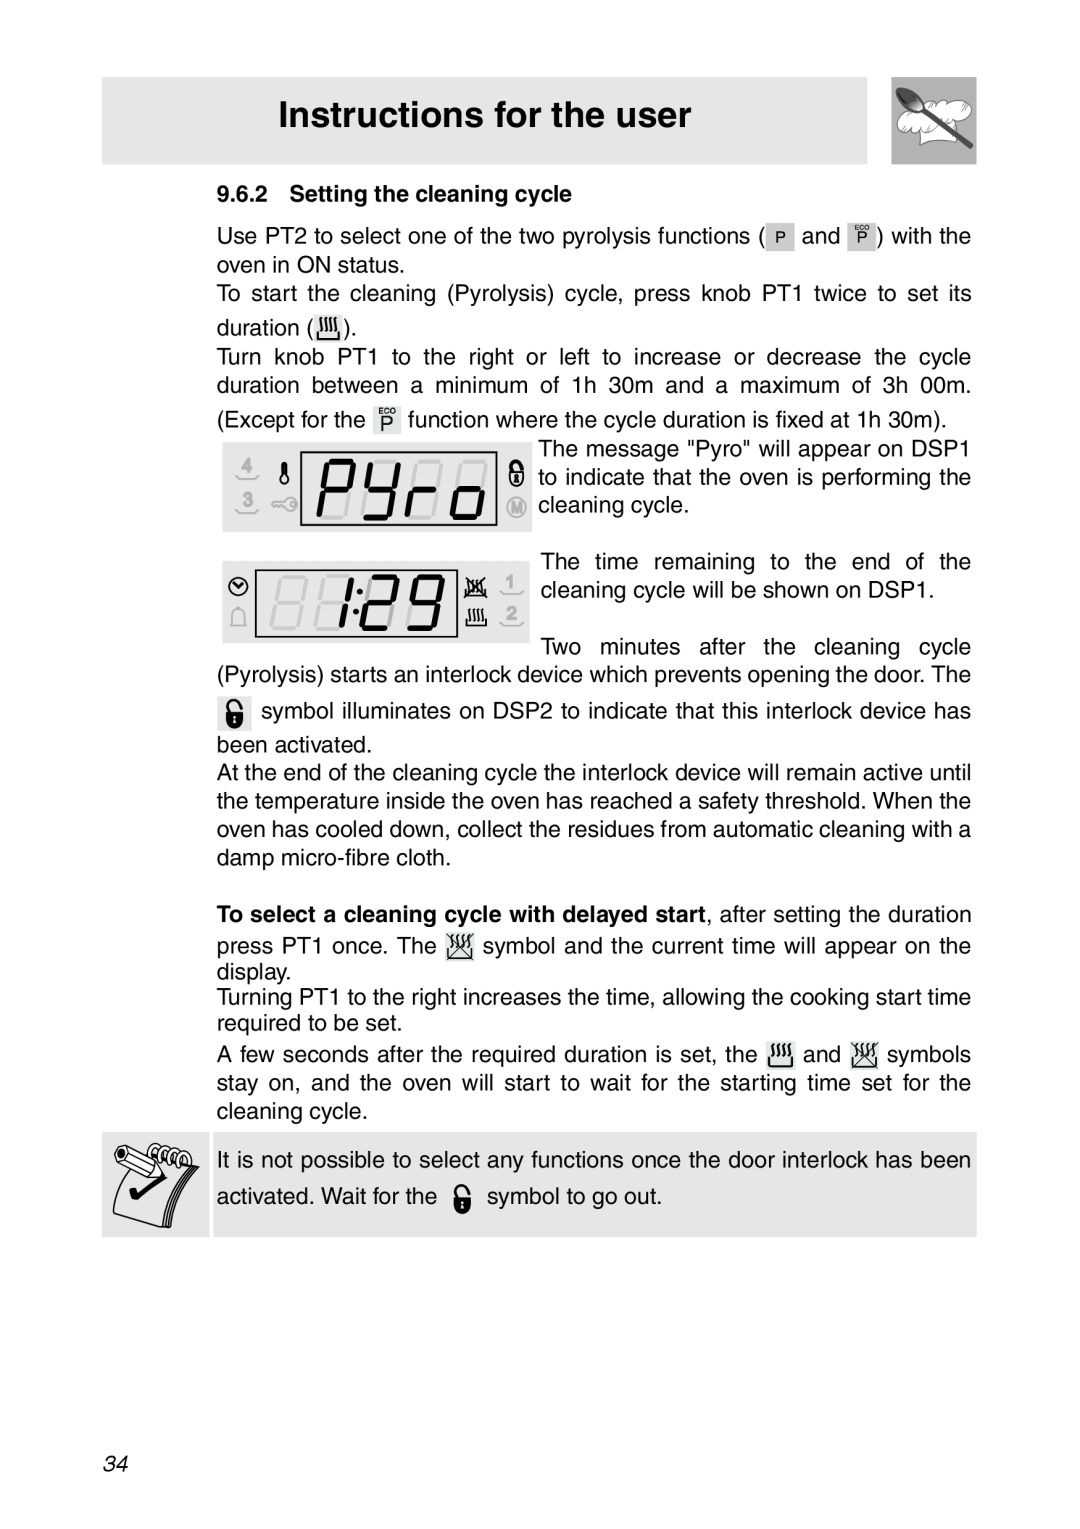 Smeg SC112 manual Setting the cleaning cycle, Instructions for the user, The message Pyro will appear on DSP1 